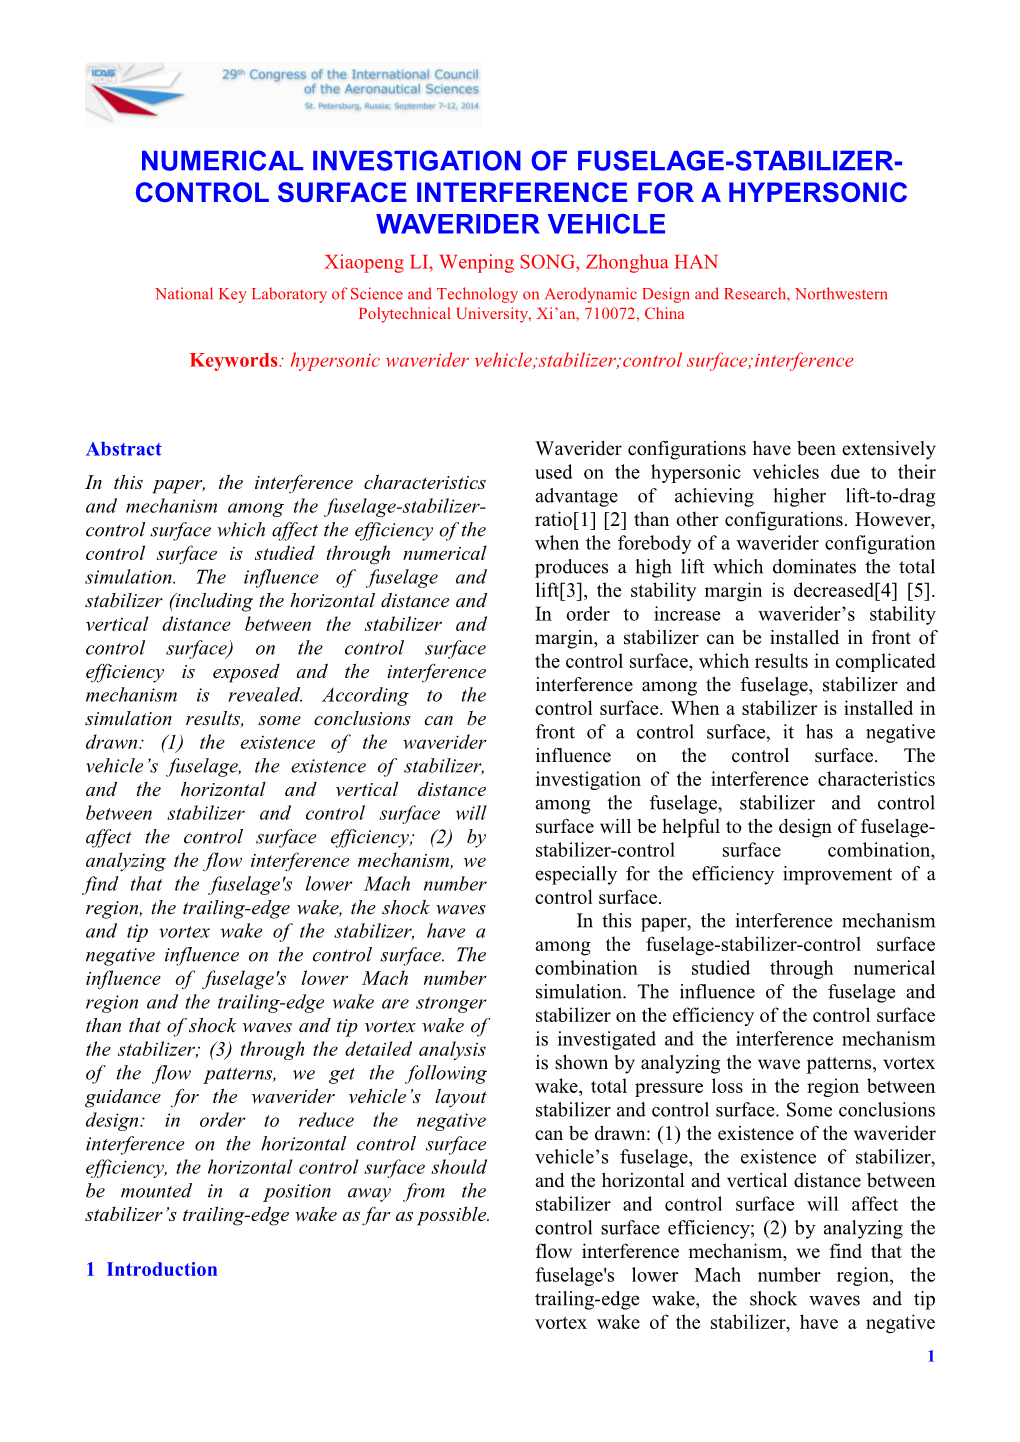 Numerical Investigation of Fuselage-Stabilizer-Control Surface Interference for a Hypersonic Waverider Vehicle